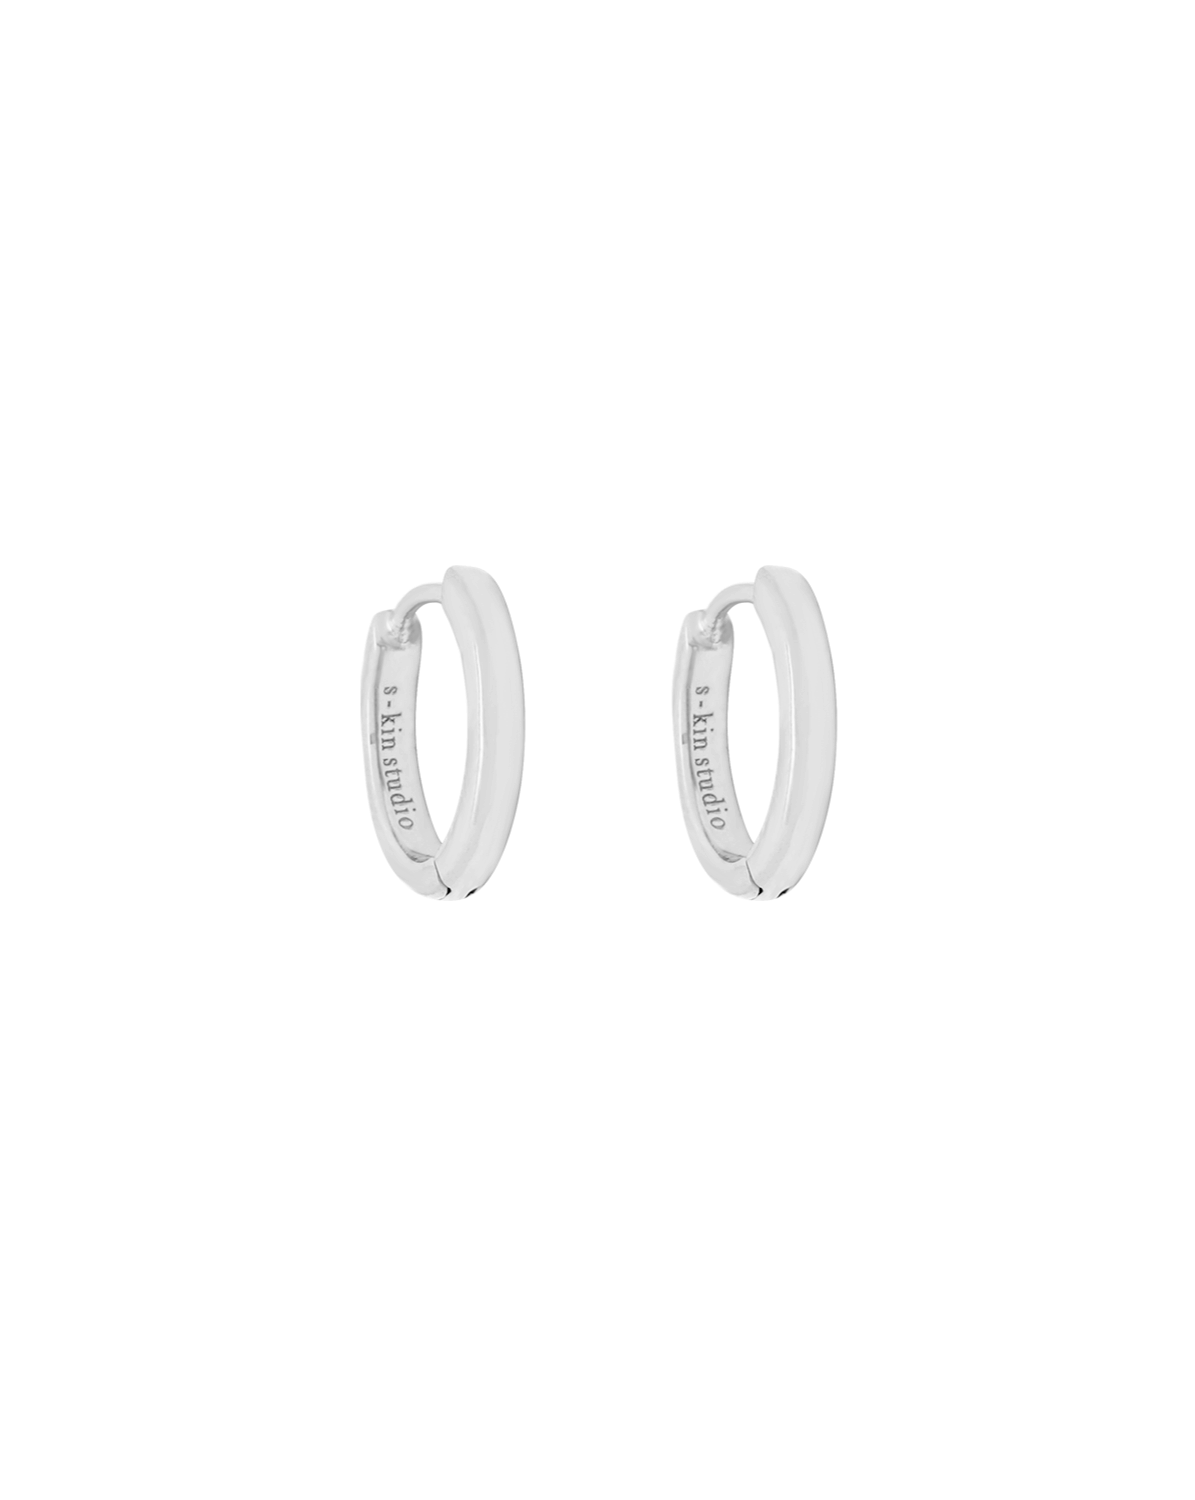 Grace Small Solid Gold Hoops - White Gold